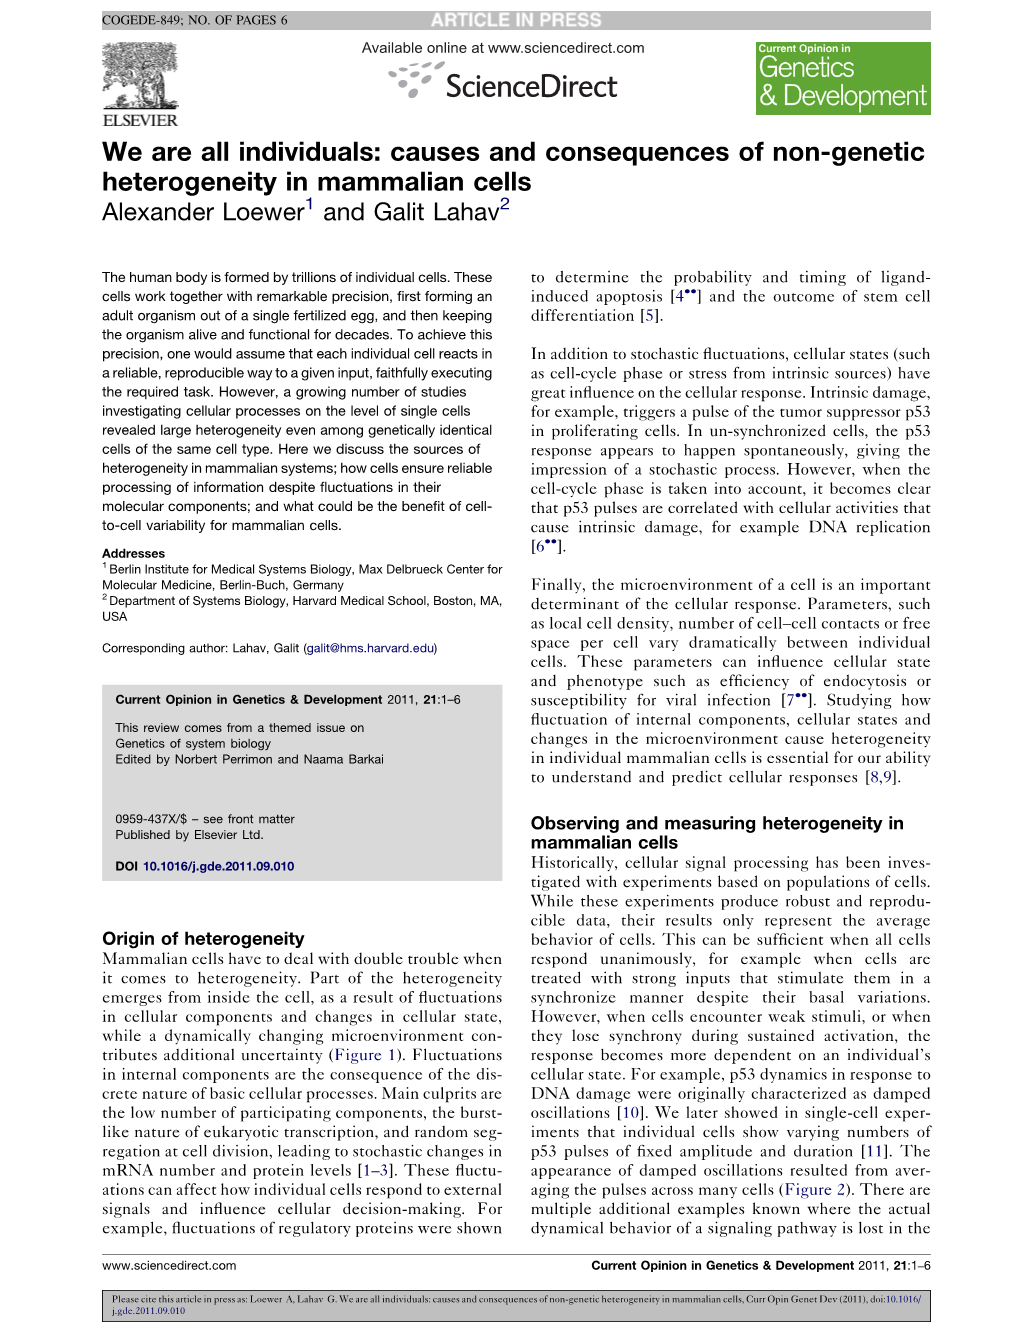 We Are All Individuals: Causes and Consequences of Non-Genetic Heterogeneity in Mammalian Cells, Curr Opin Genet Dev (2011), Doi:10.1016/ J.Gde.2011.09.010